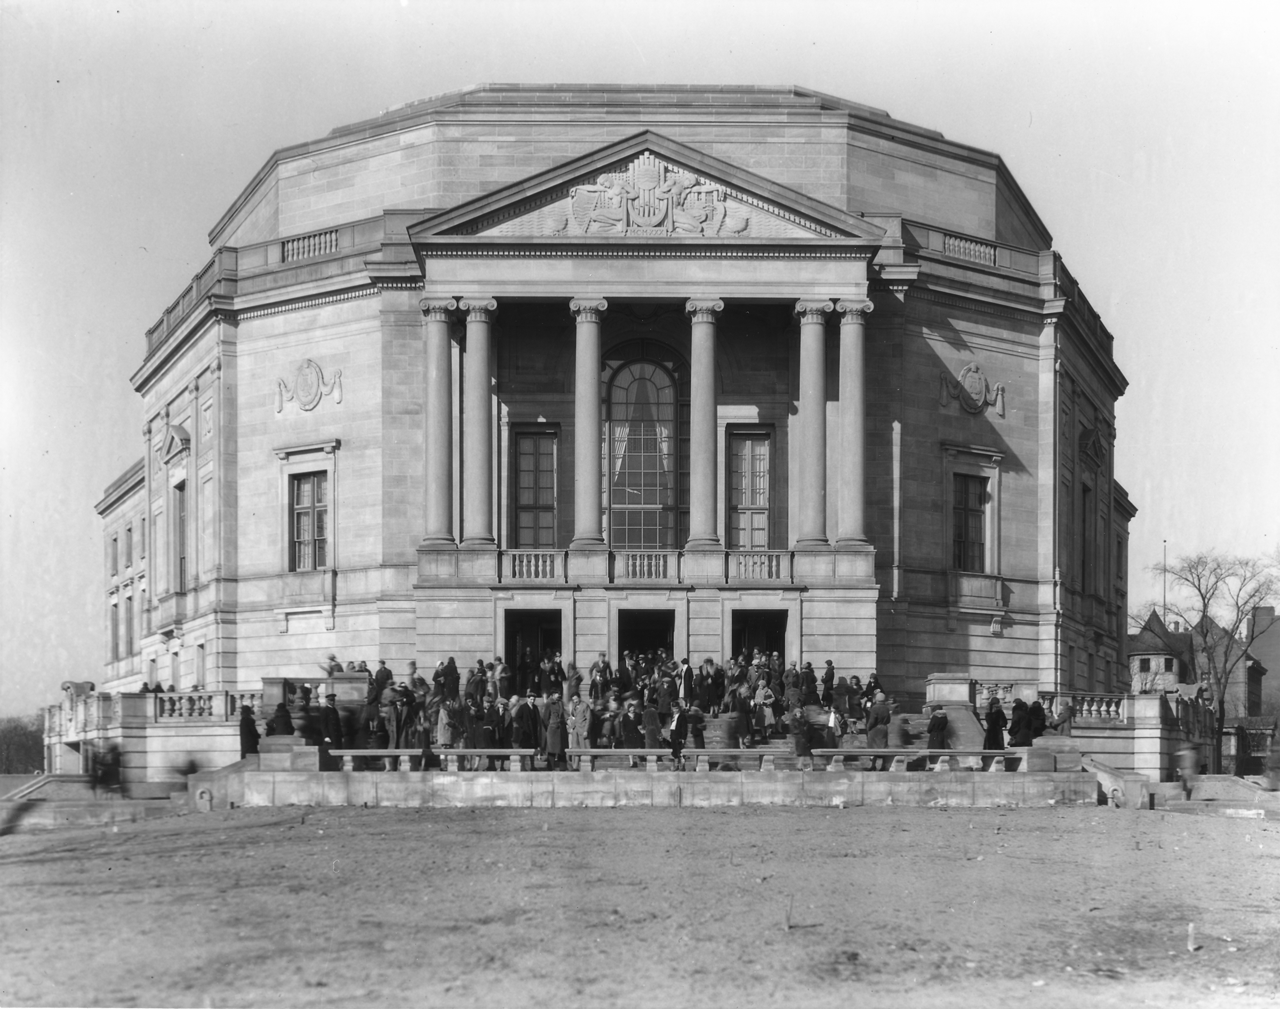 Exterior of Severance prior to landscaping, 1931.